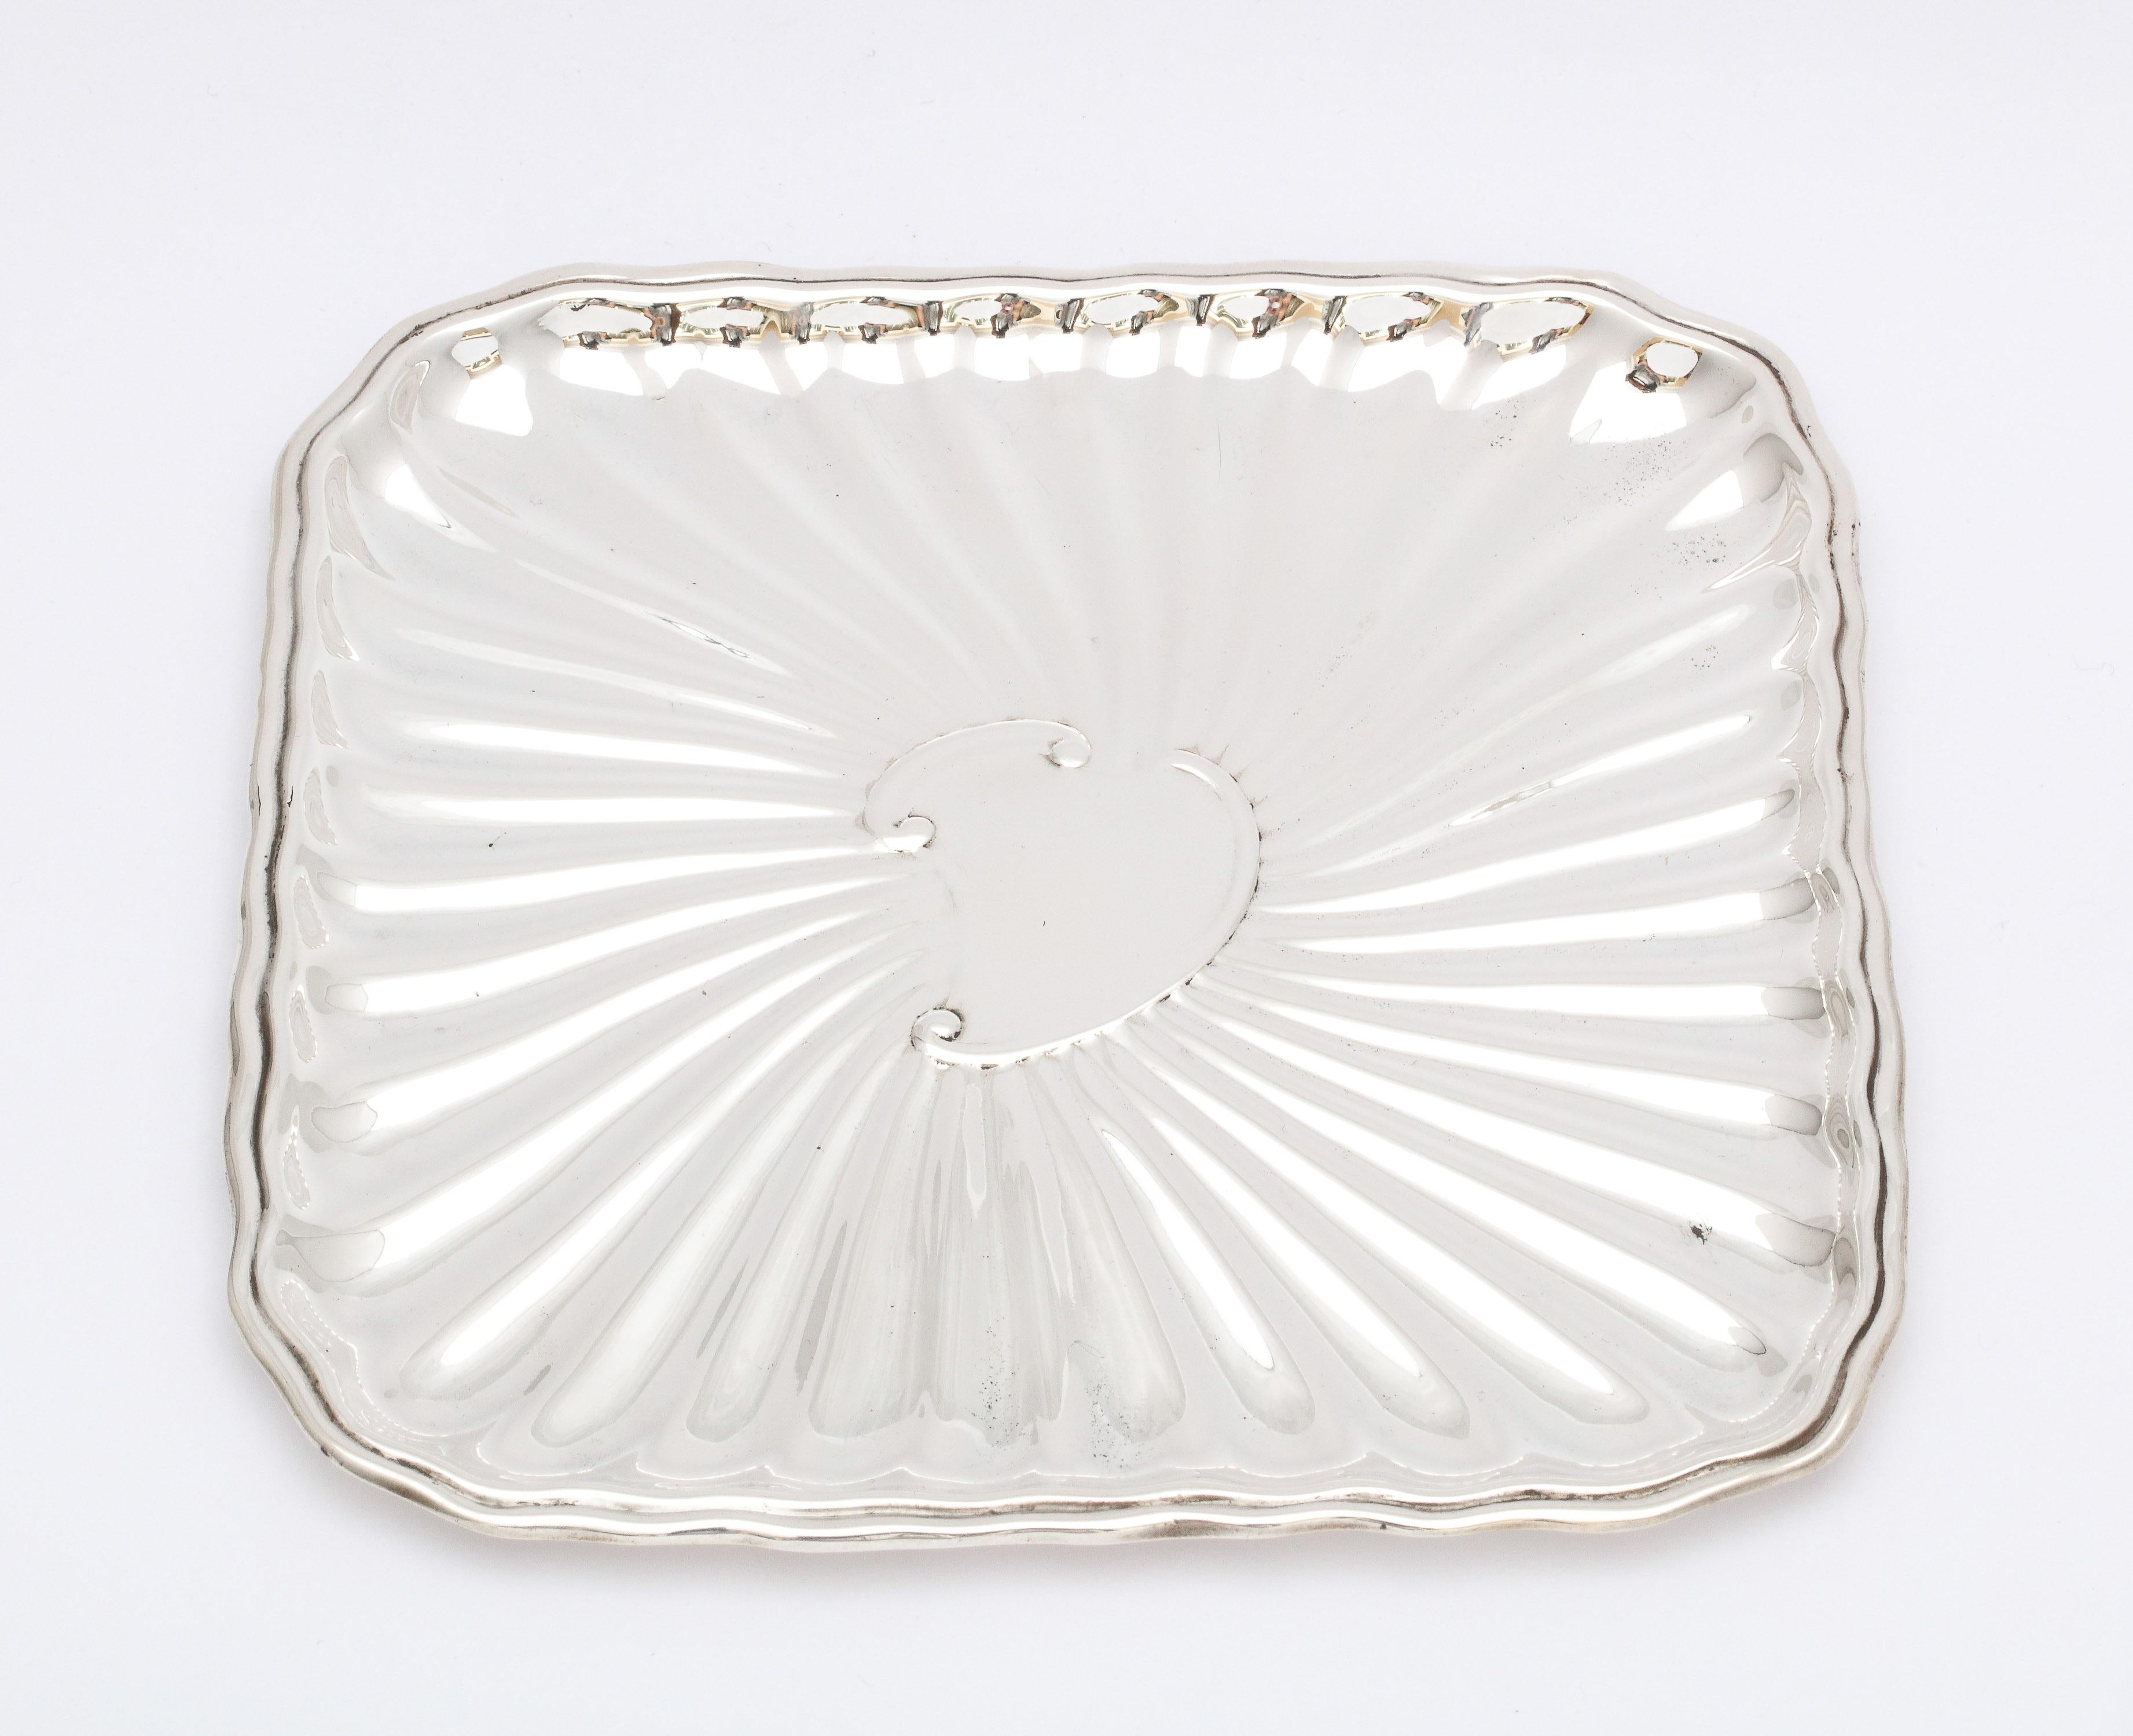 Edwardian period, sterling silver card tray, J.E. Caldwell and Company, Philadelphia, circa 1915. Fluted design. Vacant cartouche. Measures 6 1/8 x 6 1/8 x 1/4 inch high when lying flat. Weighs 4.350 troy ounces. Dark spots in photos are